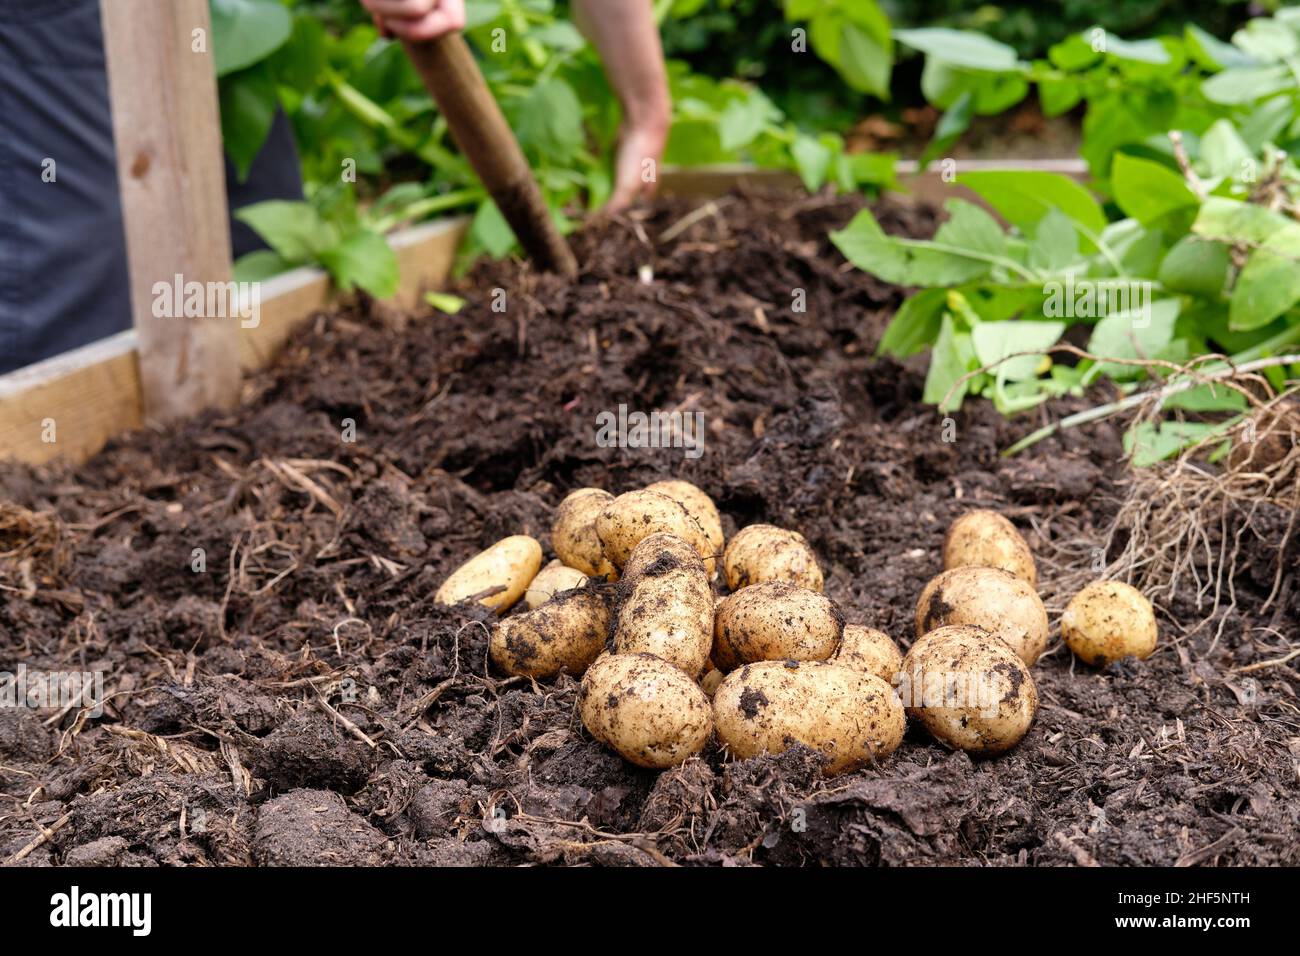 Freshly lifted Charlotte New Potatoes from a rich organic matter filled soil in a vegetable garden raised bed. Stock Photo